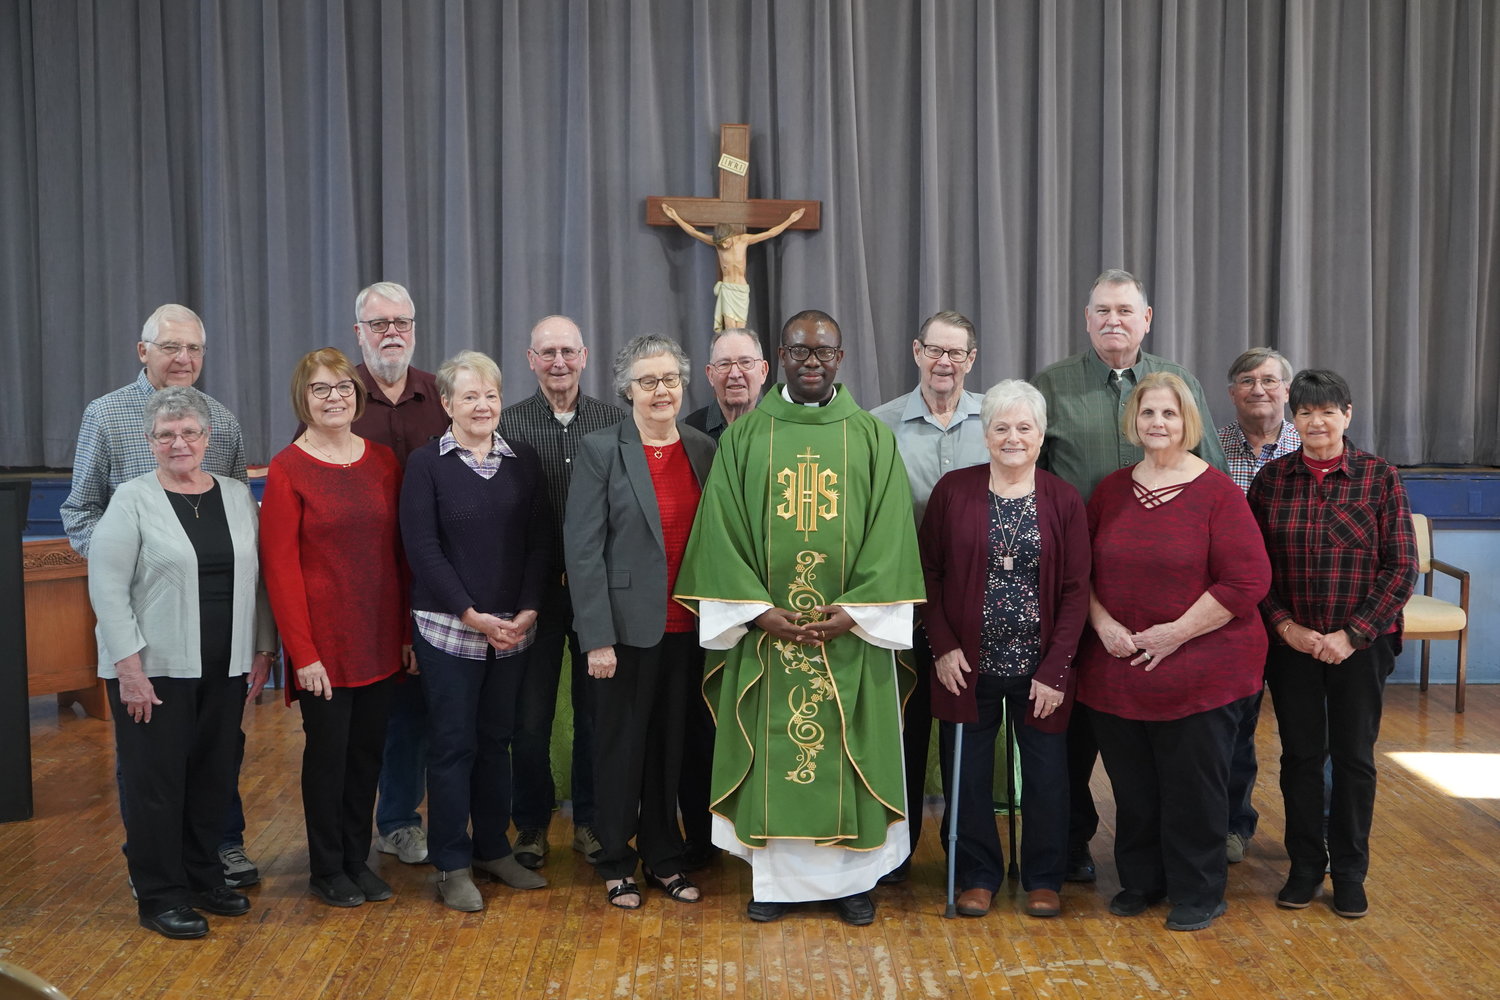 A group with over 1,000 years of combined experience of being married joins Father Ernest Dike for a photo after Mass in the Montgomery City Knights of Columbus Hall on Valentine’s Day.